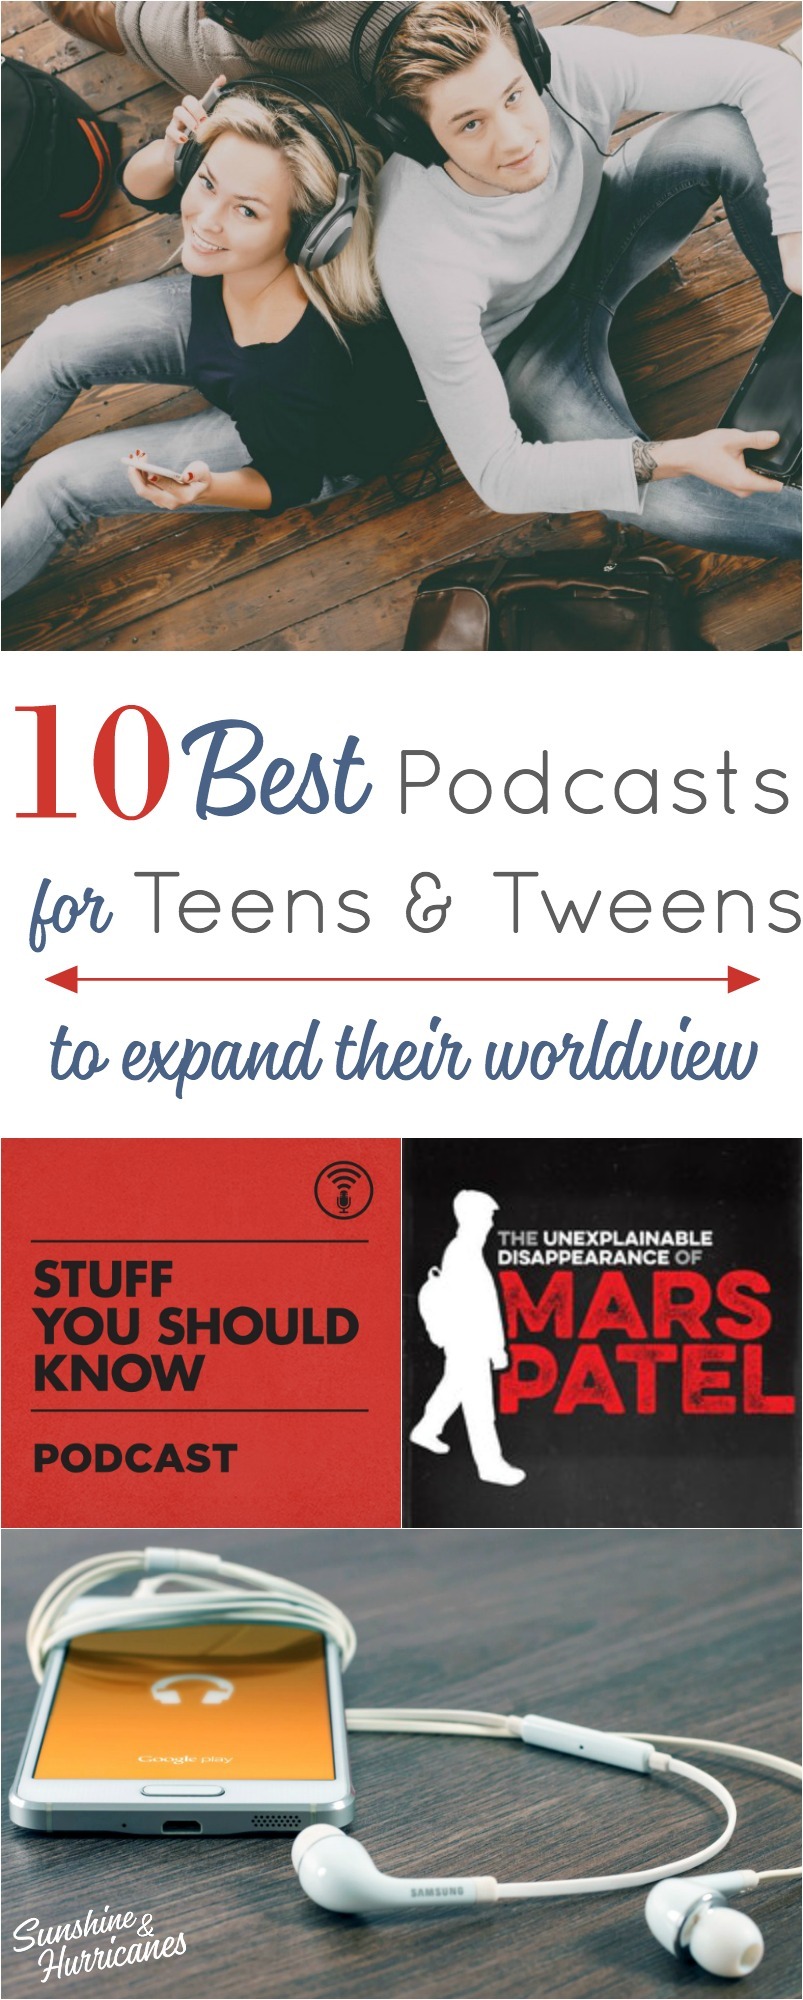 Best Podcasts for Teens and Tweens. A great way to use technology as a positive influence to help your kids grow, learn and expand their worldview. 